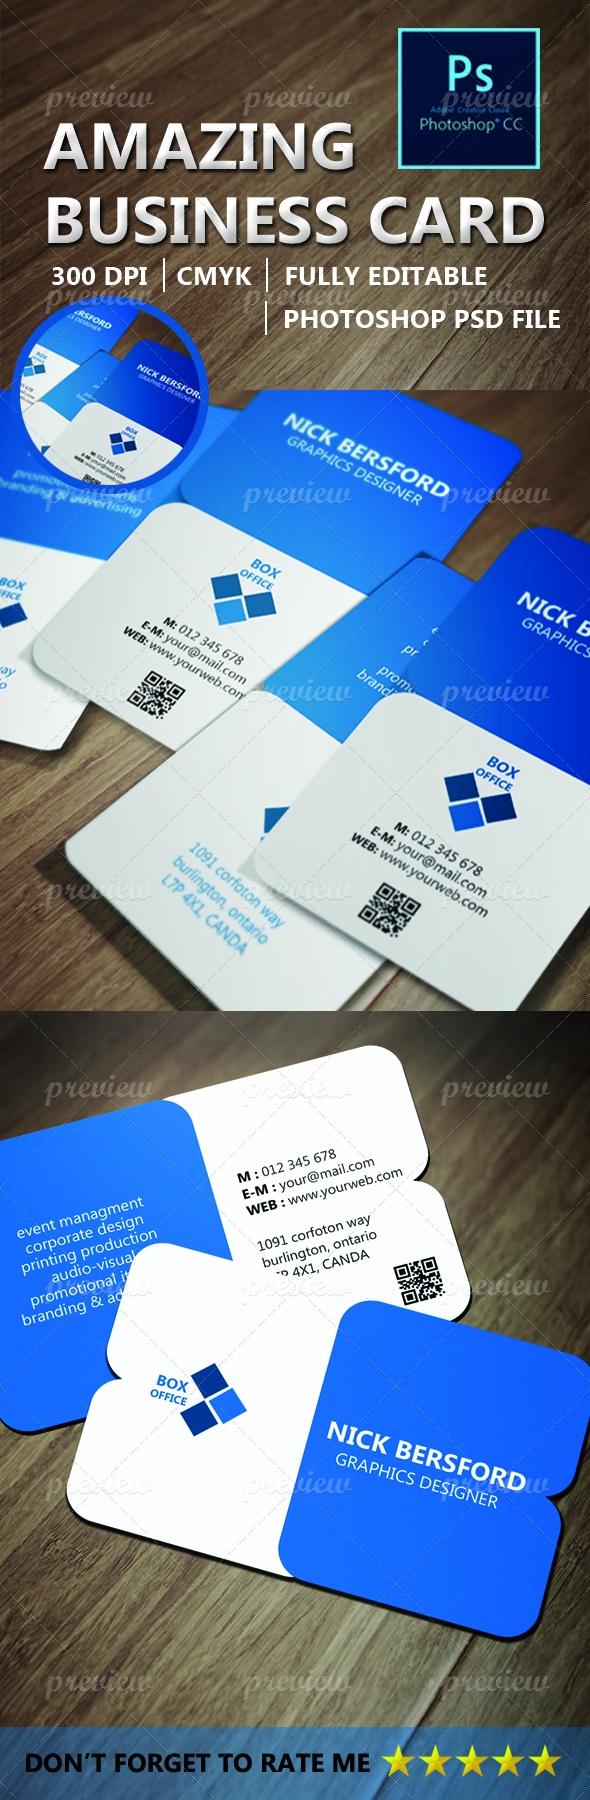 Amazing Business Card